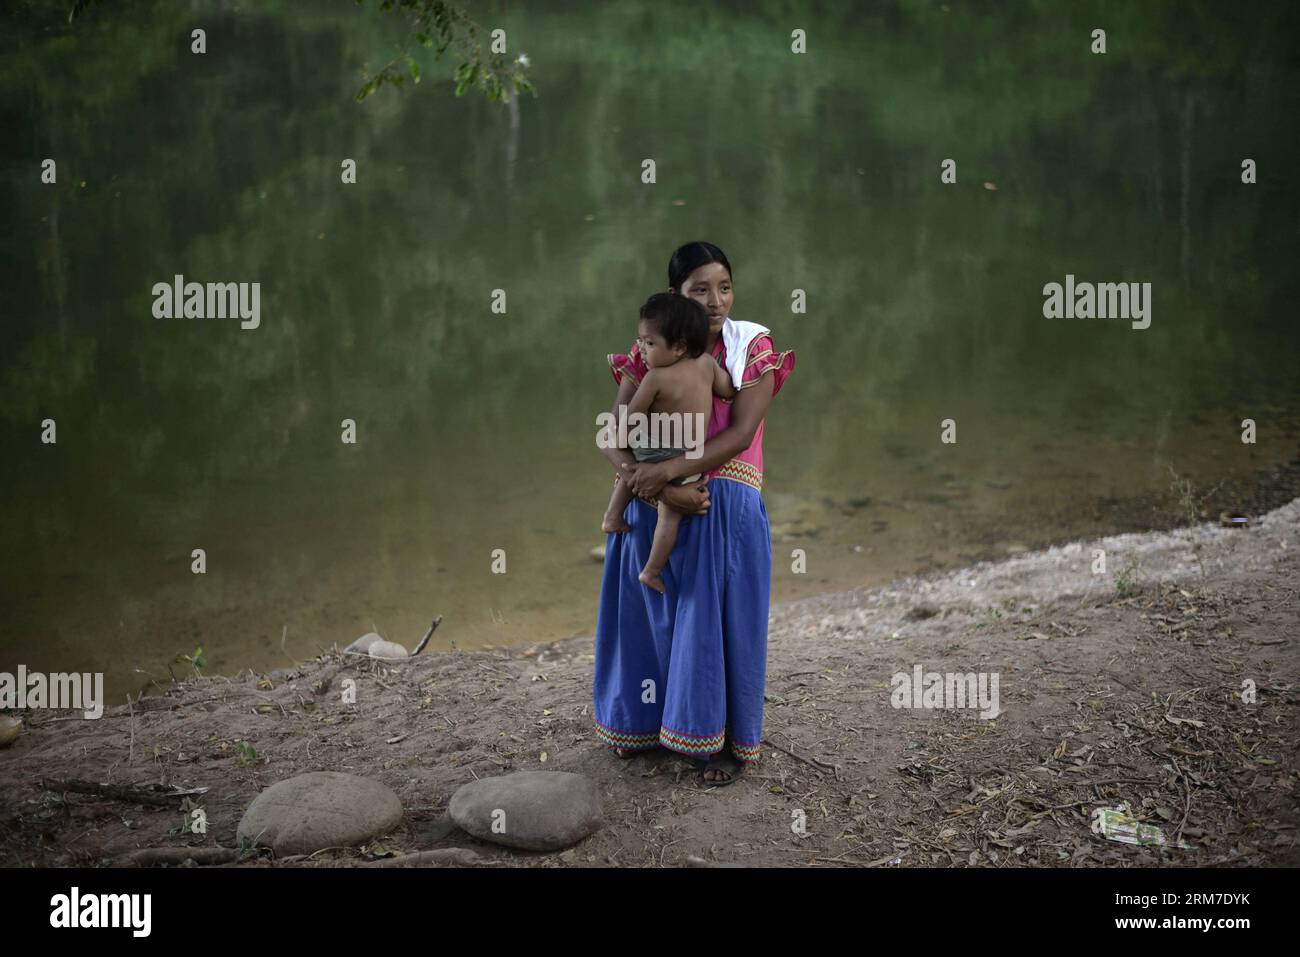 A woman of the Ngabe Bugle ethnic group carries her baby in a camp near the Tabasara river bank in the Ngabe Bugle indigenous region, 450 km west of Panama City, capital of Panama, on Feb. 24, 2014. The Ngabe Bugle indigenous region is located in the western region of Panama, and covers an area of 6,968 square km, with 91 per cent of its population living in extreme poverty. Native leaders of the Ngabe Bugle region declared a national alert , because of the eviction notice issued by a company which is developing the hydro-electric project Barro Blanco . The project will use the water from Taba Stock Photo